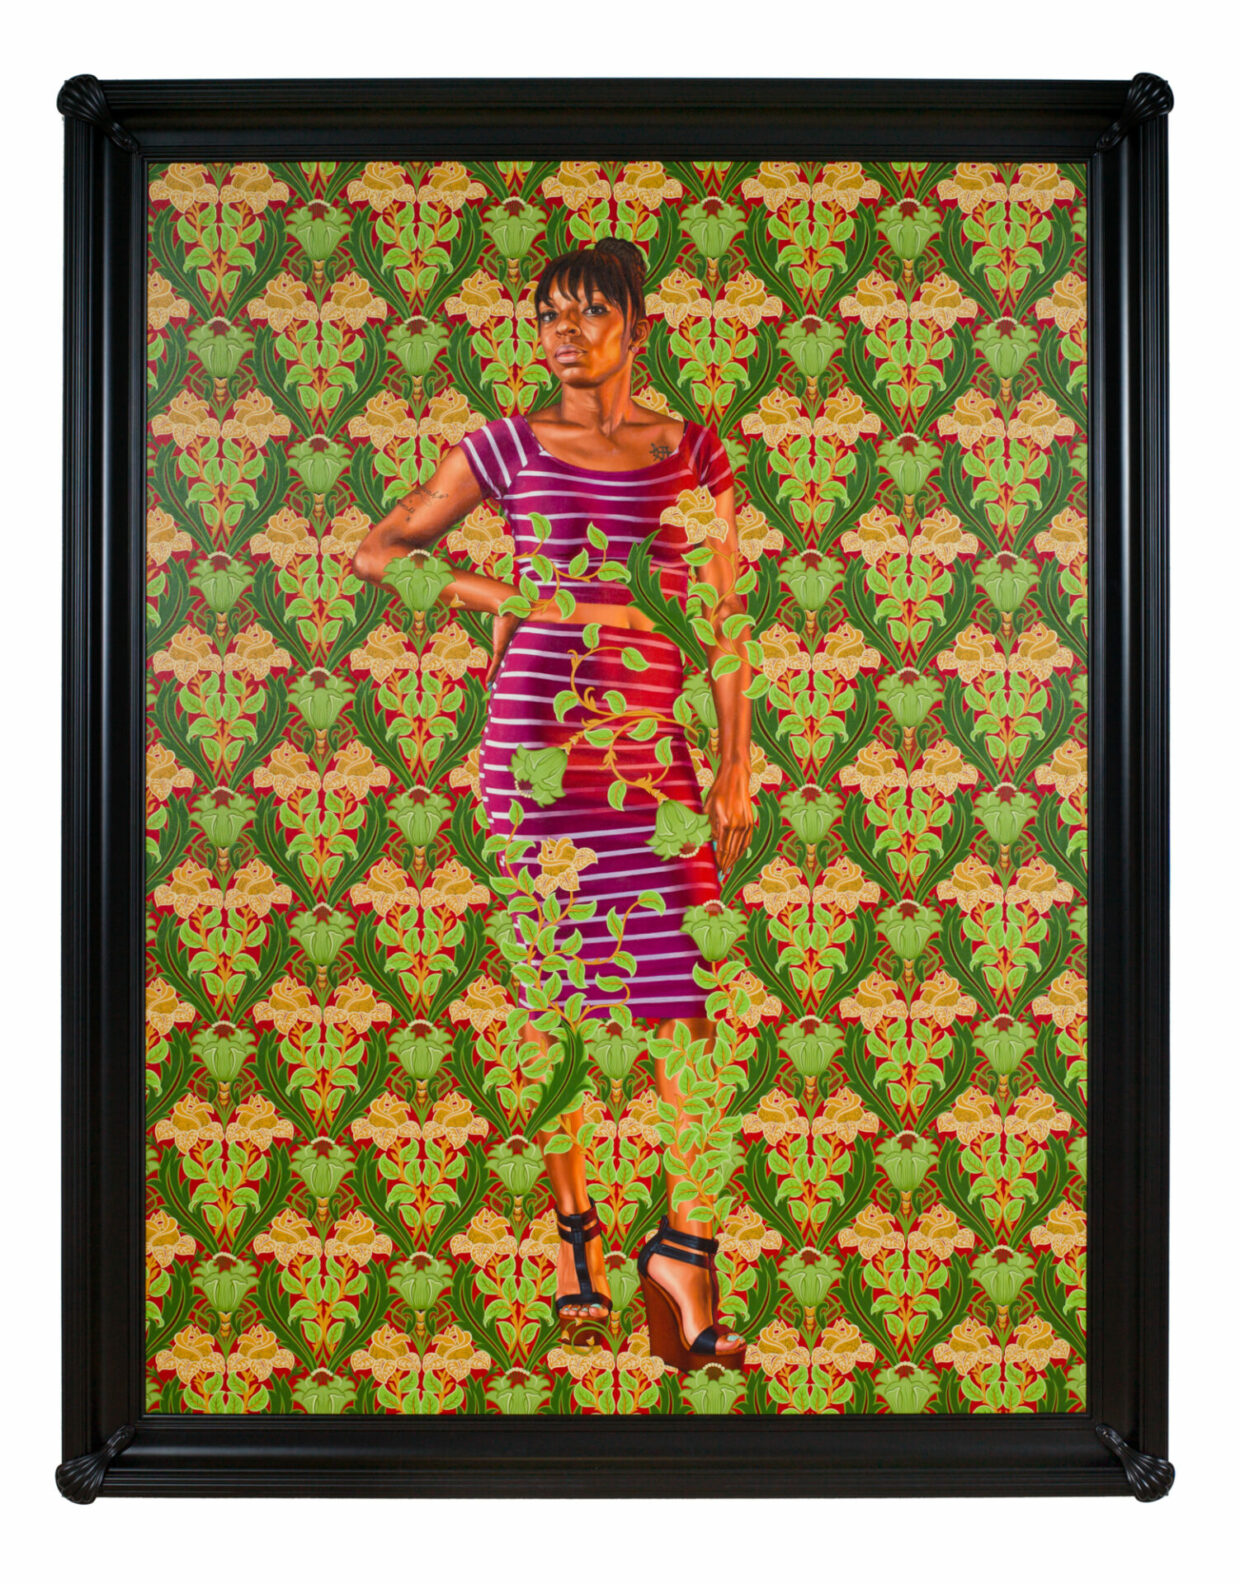 Kehinde Wiley: ‘When I first started painting black women, it was a return home’ | 8